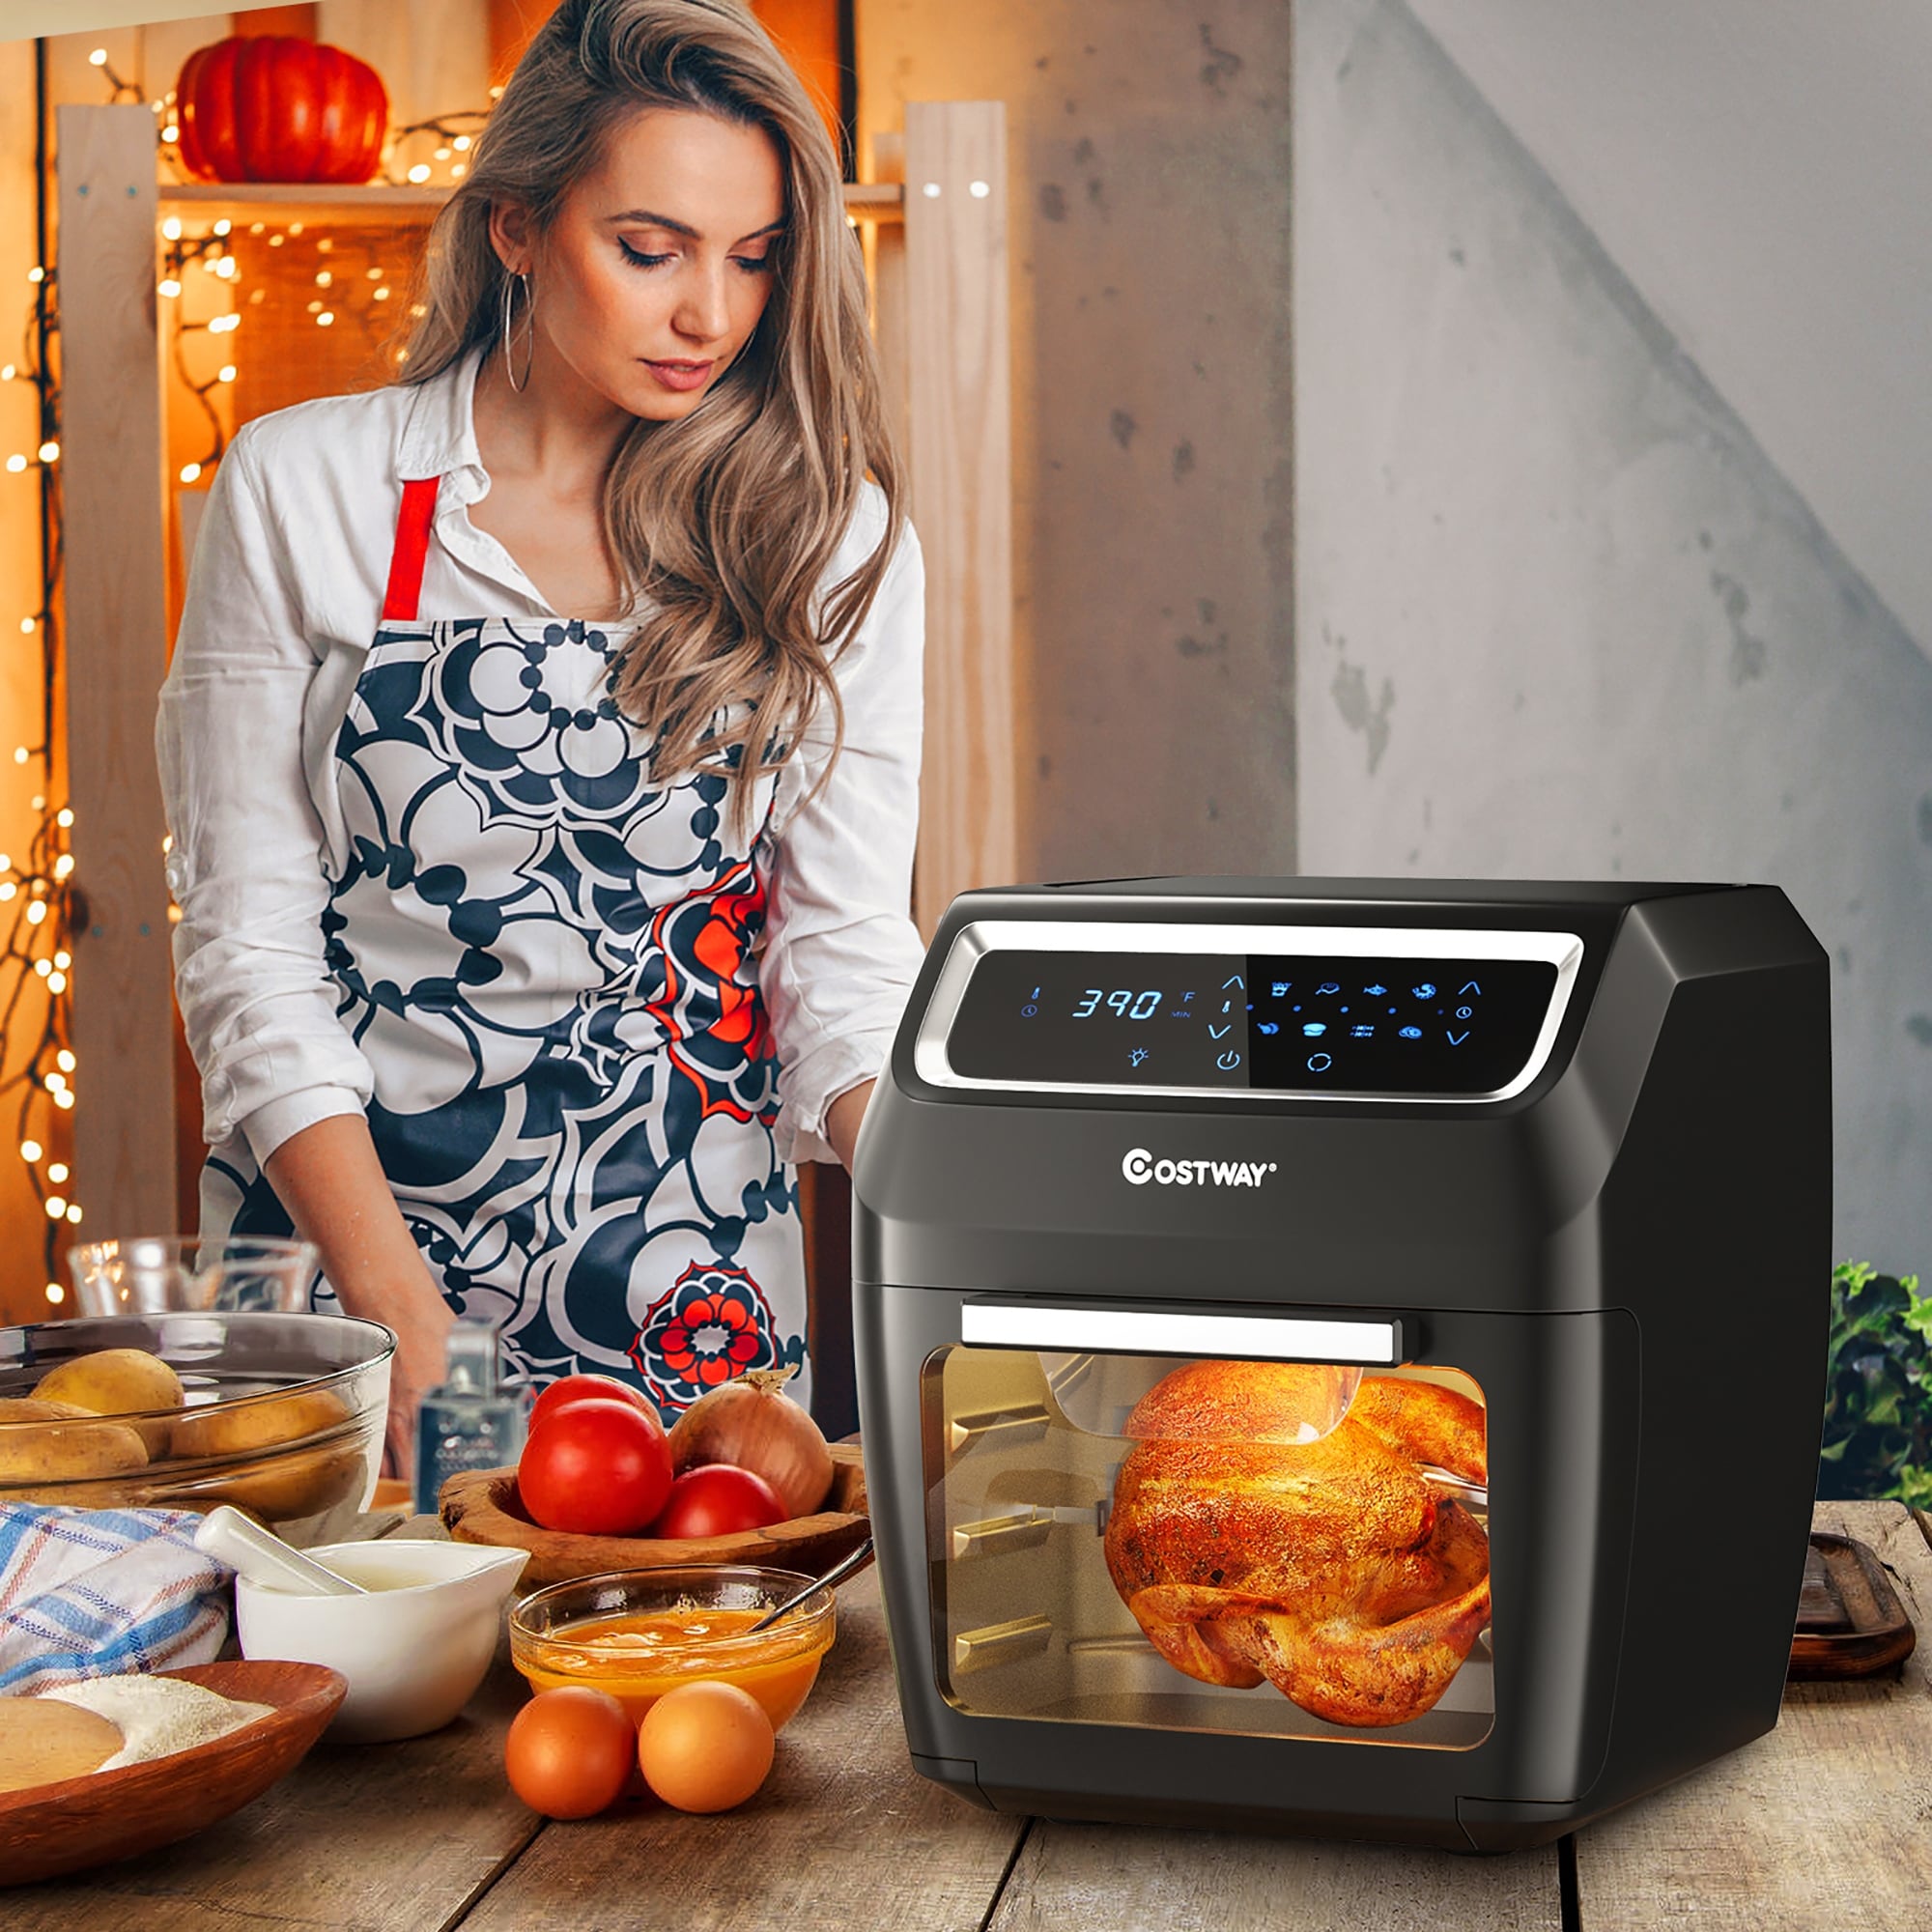 https://ak1.ostkcdn.com/images/products/is/images/direct/856571b91dbd6cb3654ad5d0f62ca9093ac4a33b/Costway-1700W-Electric-Air-Fryer-Oven-8-In-1-Rotisserie-Dehydrator.jpg